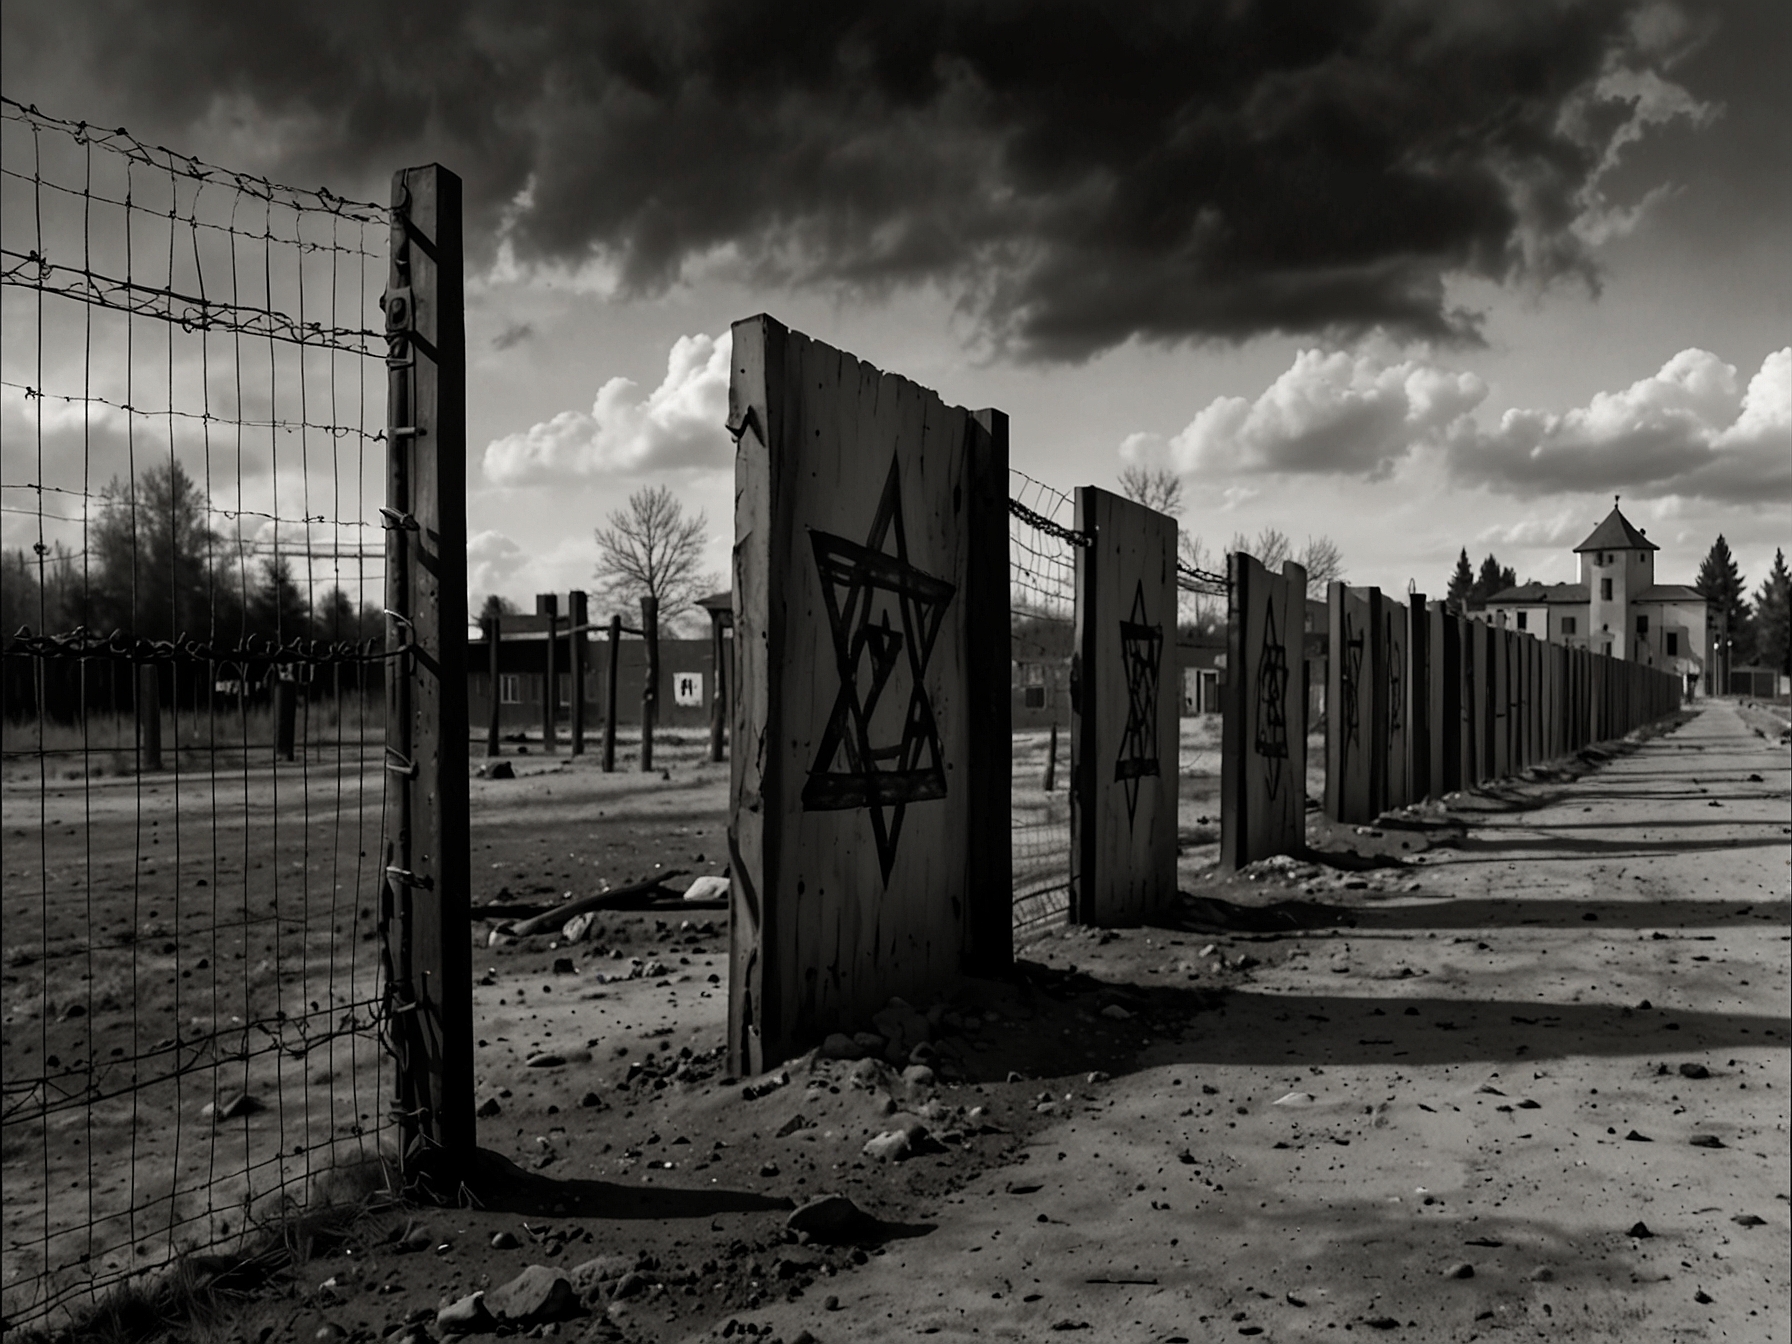 A historic image reflecting the solemn memory of the Holocaust and its enduring impact on contemporary geopolitics.